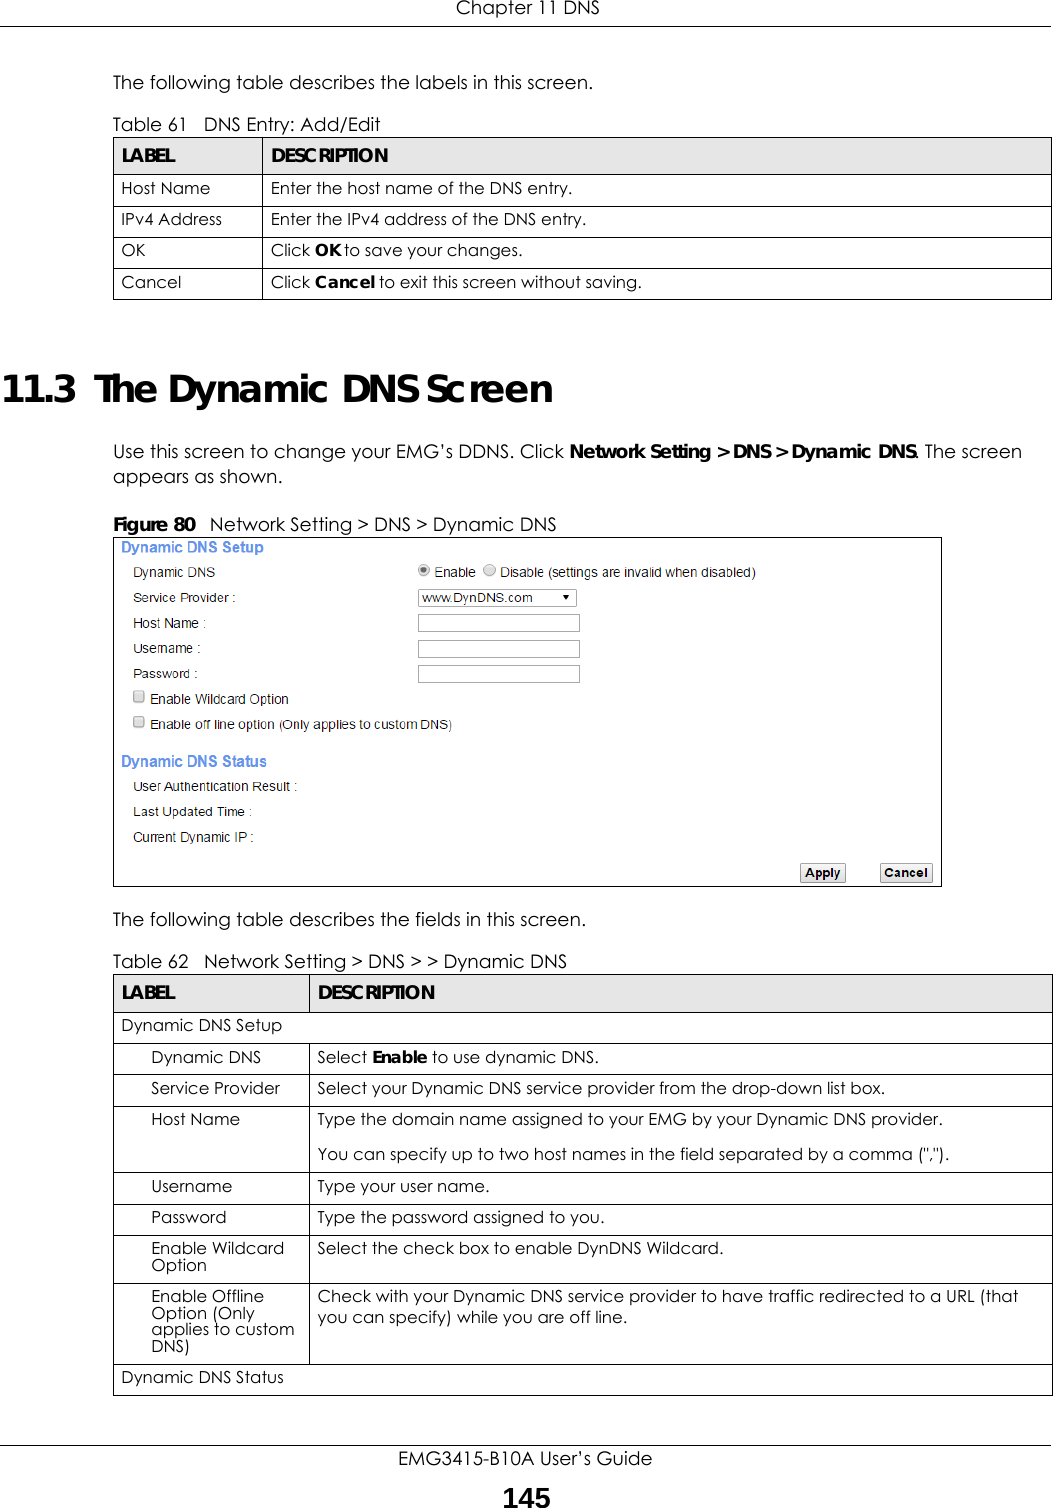  Chapter 11 DNSEMG3415-B10A User’s Guide145The following table describes the labels in this screen. 11.3  The Dynamic DNS ScreenUse this screen to change your EMG’s DDNS. Click Network Setting &gt; DNS &gt; Dynamic DNS. The screen appears as shown.Figure 80   Network Setting &gt; DNS &gt; Dynamic DNSThe following table describes the fields in this screen. Table 61   DNS Entry: Add/EditLABEL DESCRIPTIONHost Name Enter the host name of the DNS entry.IPv4 Address Enter the IPv4 address of the DNS entry.OK Click OK to save your changes.Cancel Click Cancel to exit this screen without saving.Table 62   Network Setting &gt; DNS &gt; &gt; Dynamic DNSLABEL DESCRIPTIONDynamic DNS SetupDynamic DNS Select Enable to use dynamic DNS.Service Provider Select your Dynamic DNS service provider from the drop-down list box.Host Name Type the domain name assigned to your EMG by your Dynamic DNS provider.You can specify up to two host names in the field separated by a comma (&quot;,&quot;).Username Type your user name.Password Type the password assigned to you.Enable Wildcard Option Select the check box to enable DynDNS Wildcard.Enable Offline Option (Only applies to custom DNS)Check with your Dynamic DNS service provider to have traffic redirected to a URL (that you can specify) while you are off line.Dynamic DNS Status